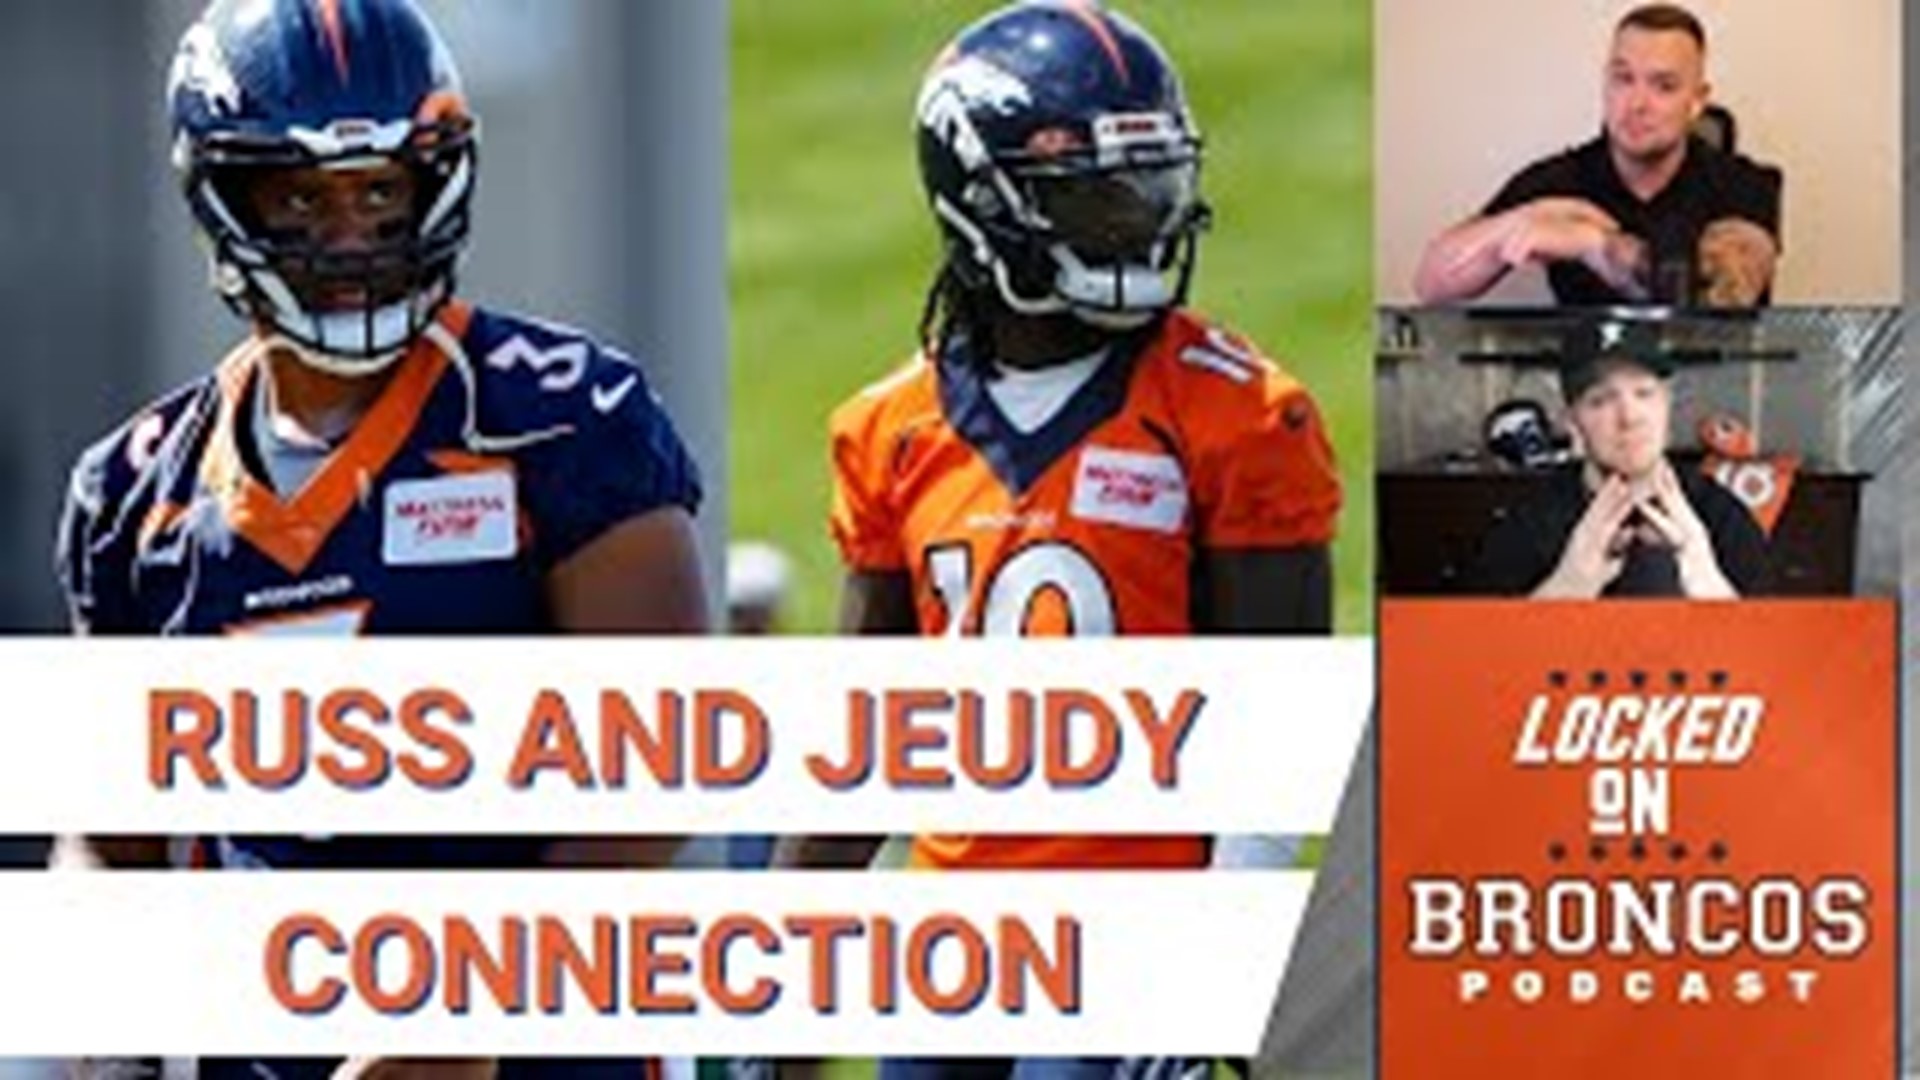 Denver Broncos offense thriving with Jerry Jeudy and Russell Wilson, Locked on Broncos Podcast